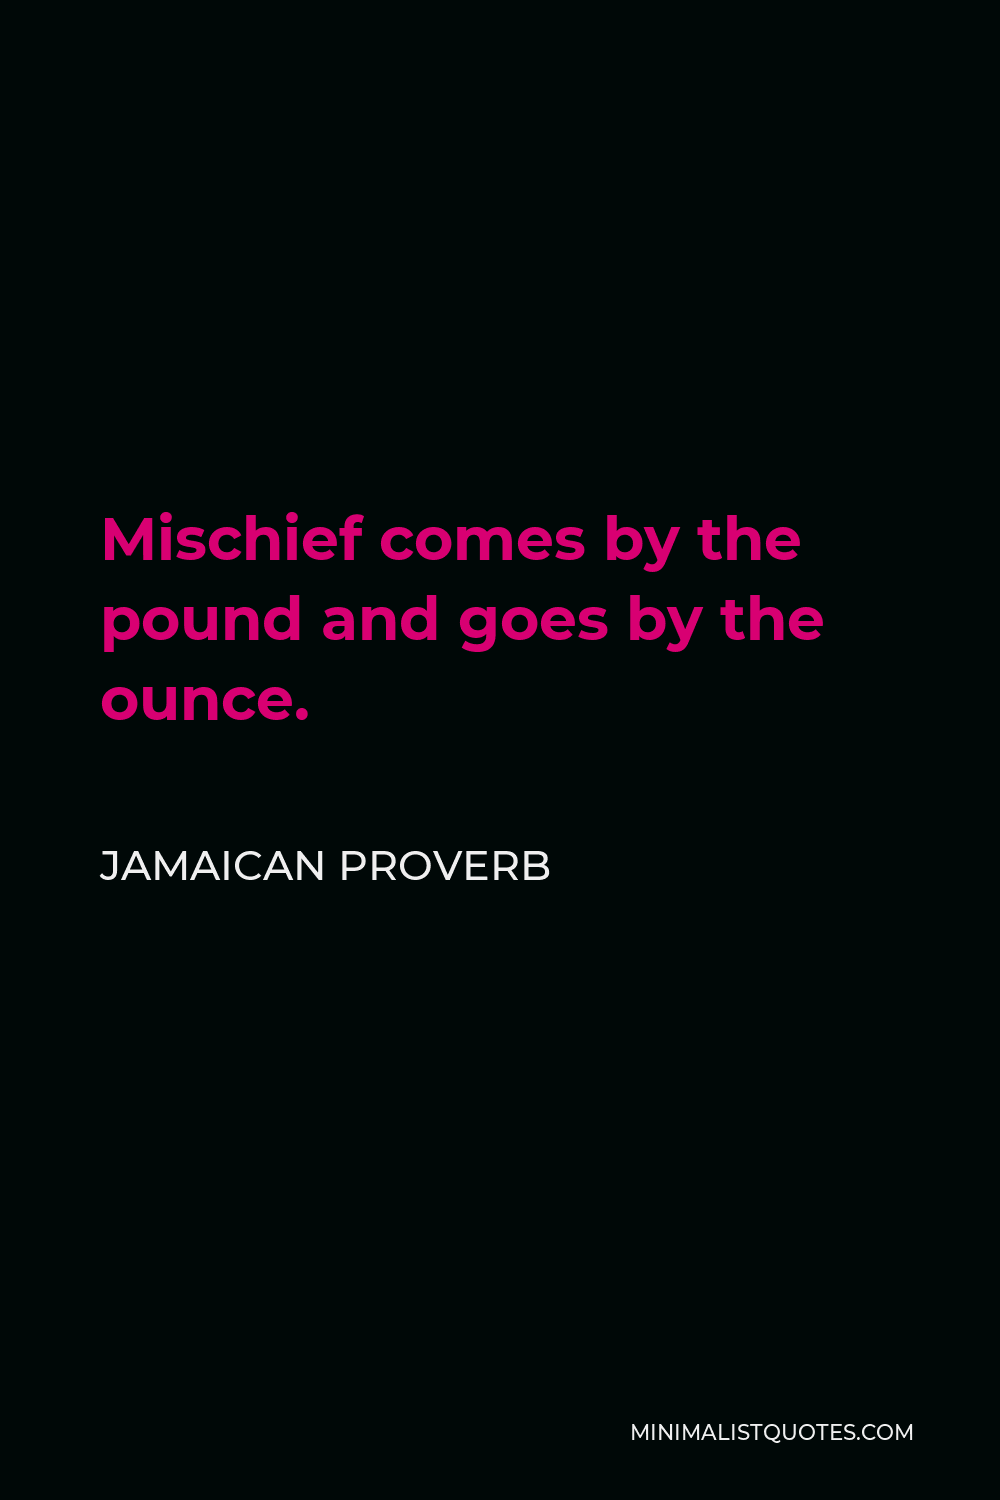 Jamaican Proverb Quote - Mischief comes by the pound and goes by the ounce.